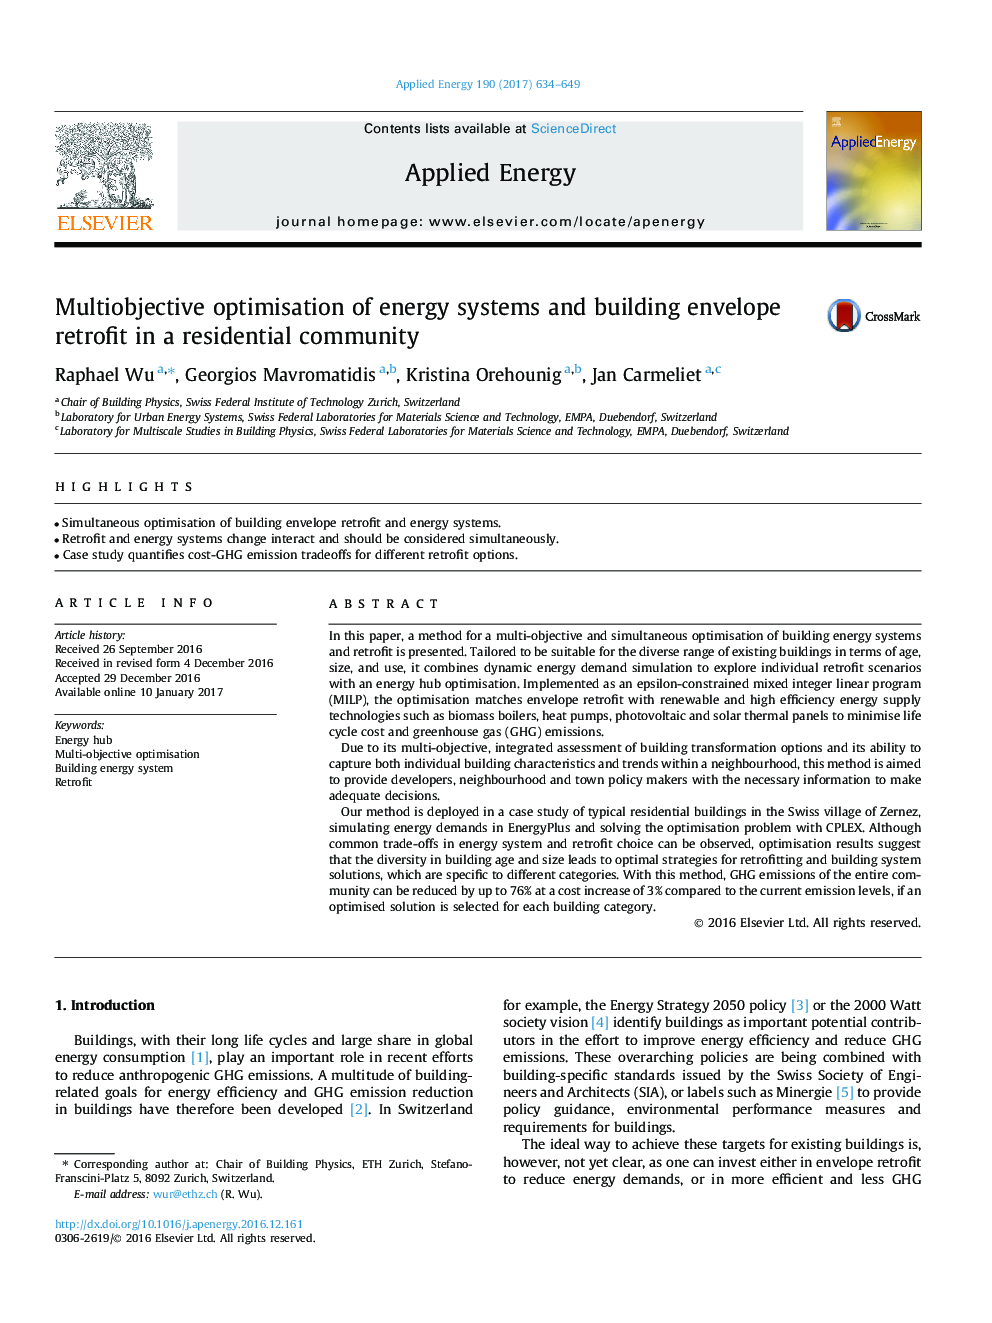 Multiobjective optimisation of energy systems and building envelope retrofit in a residential community